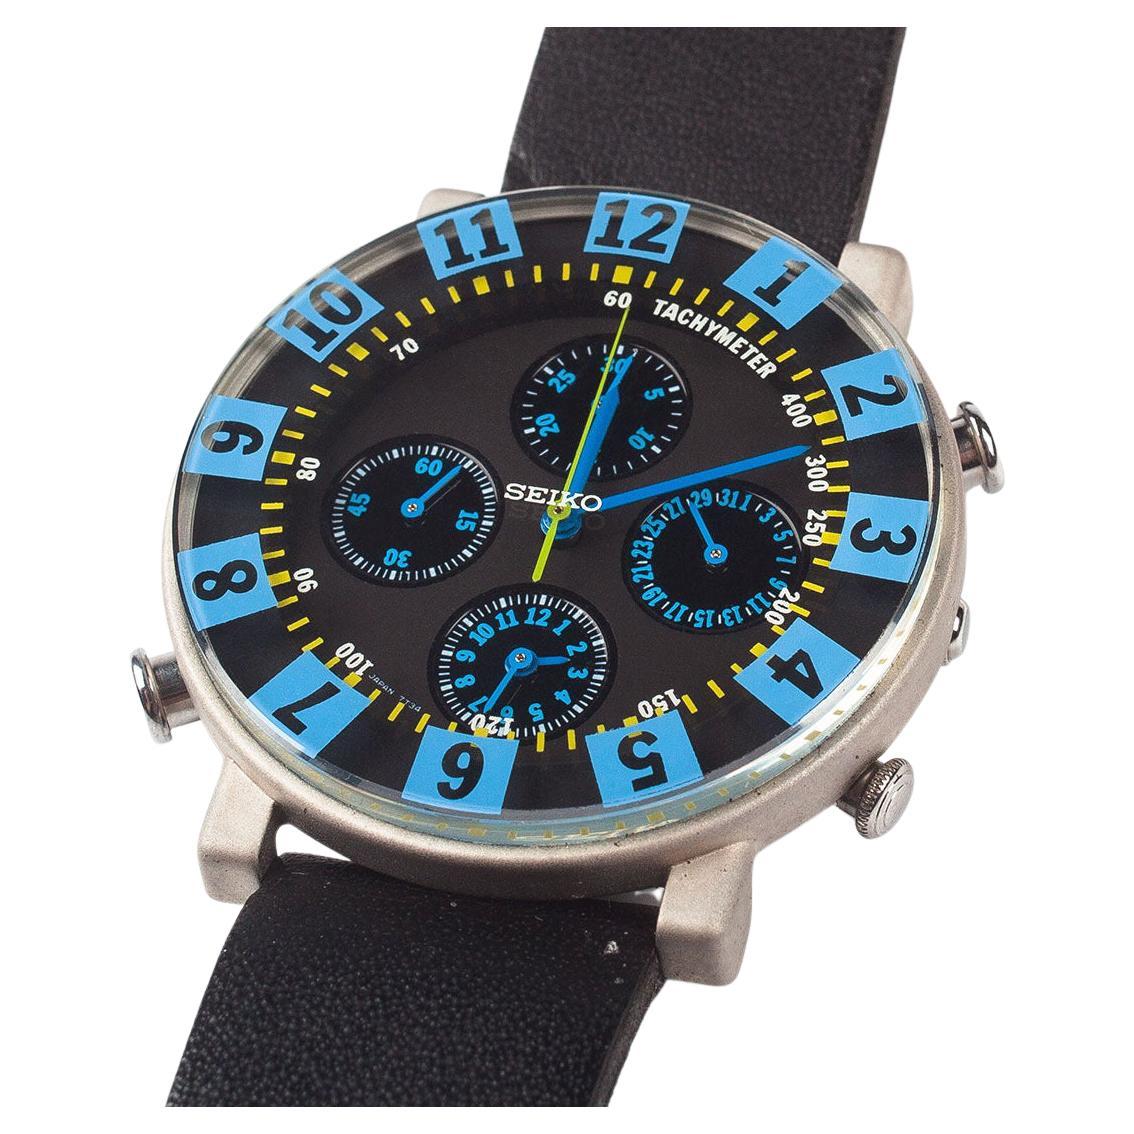 Ettore Sottsass Chronograph Watch, Collection Sottsass for Seiko, Japan, 1993